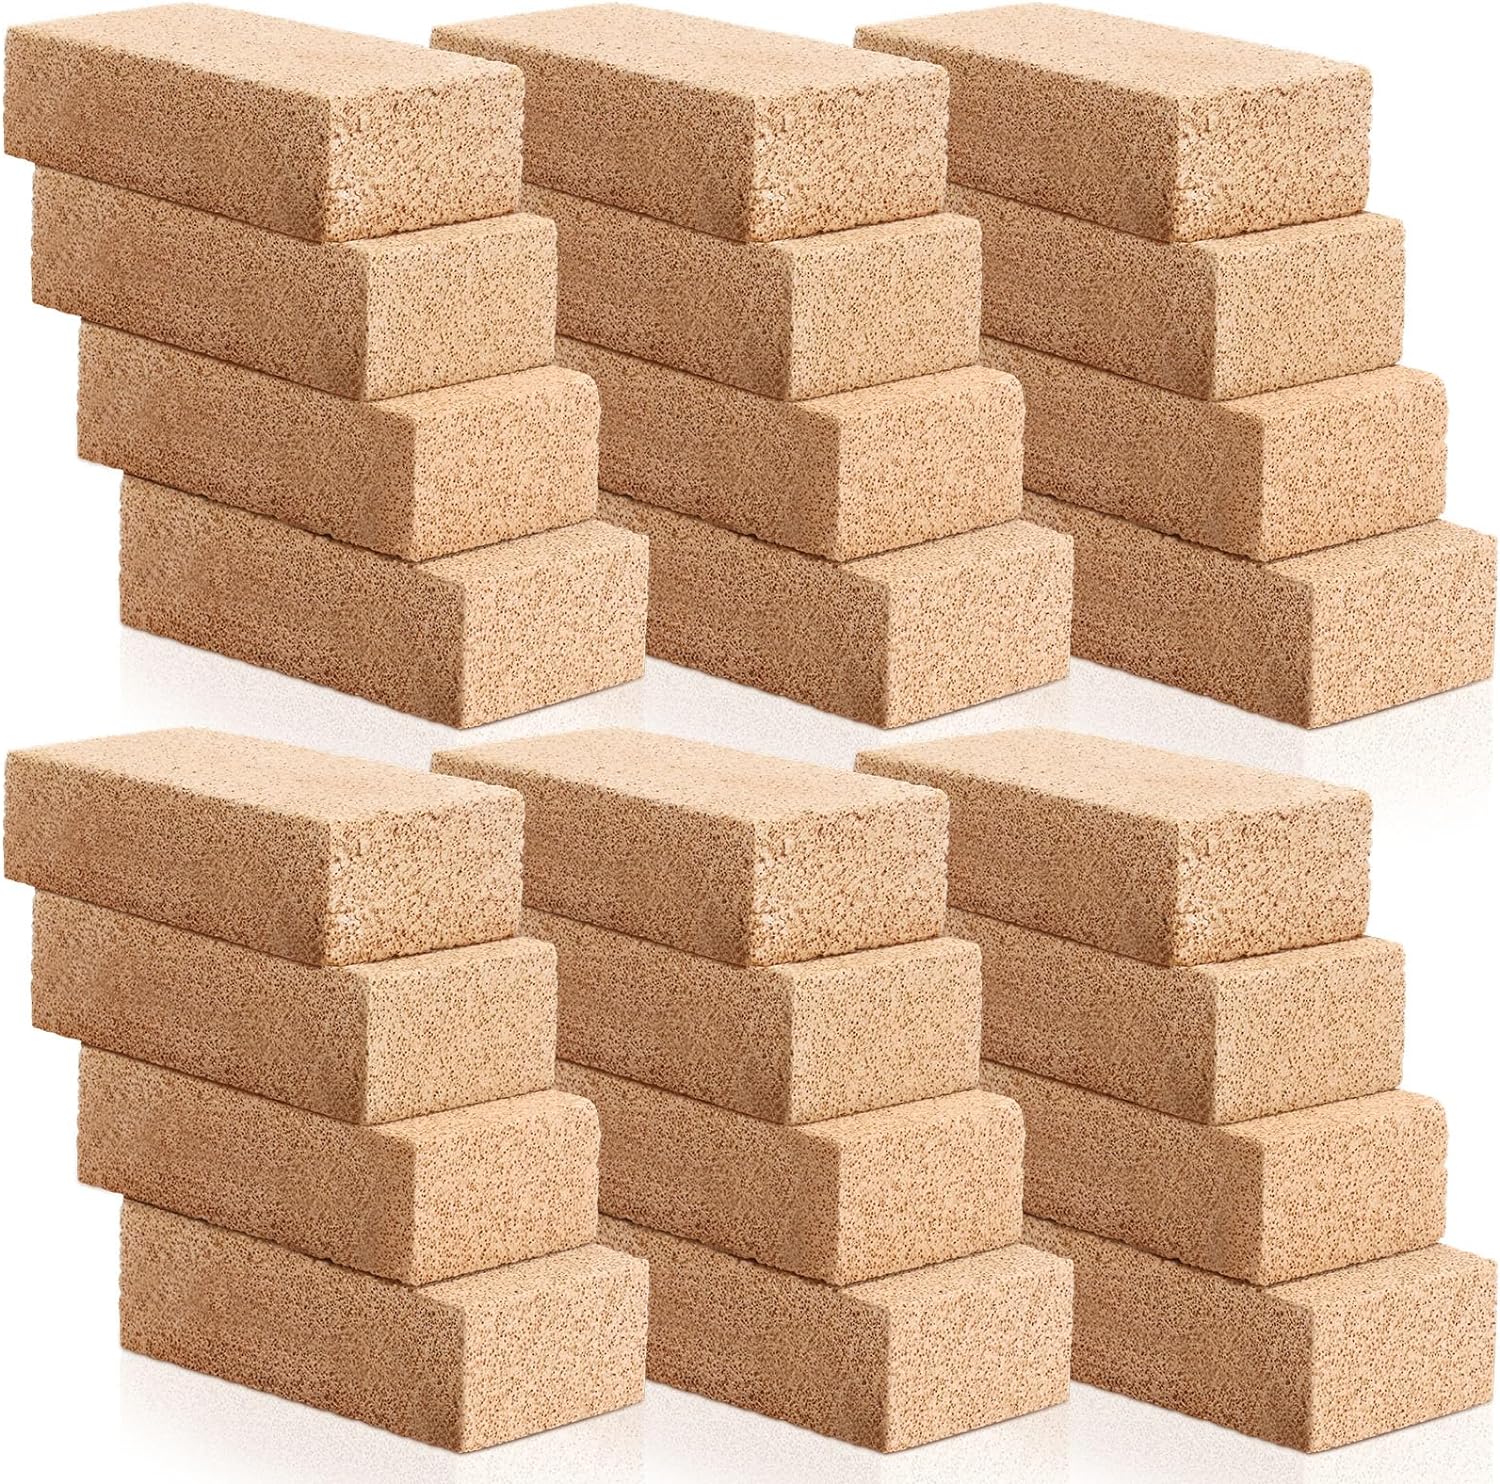 Fire Bricks, Woodstove Firebricks, Size 9″ x 4-1/2″ x 2-1/2″, 2-Pack,  Insulating Fire Bricks, 2.5 Thick Clay Firebricks Replacement for Wood  Stoves, Fireplaces, Fire Pit, Kiln, Pizza Oven - Yahoo Shopping